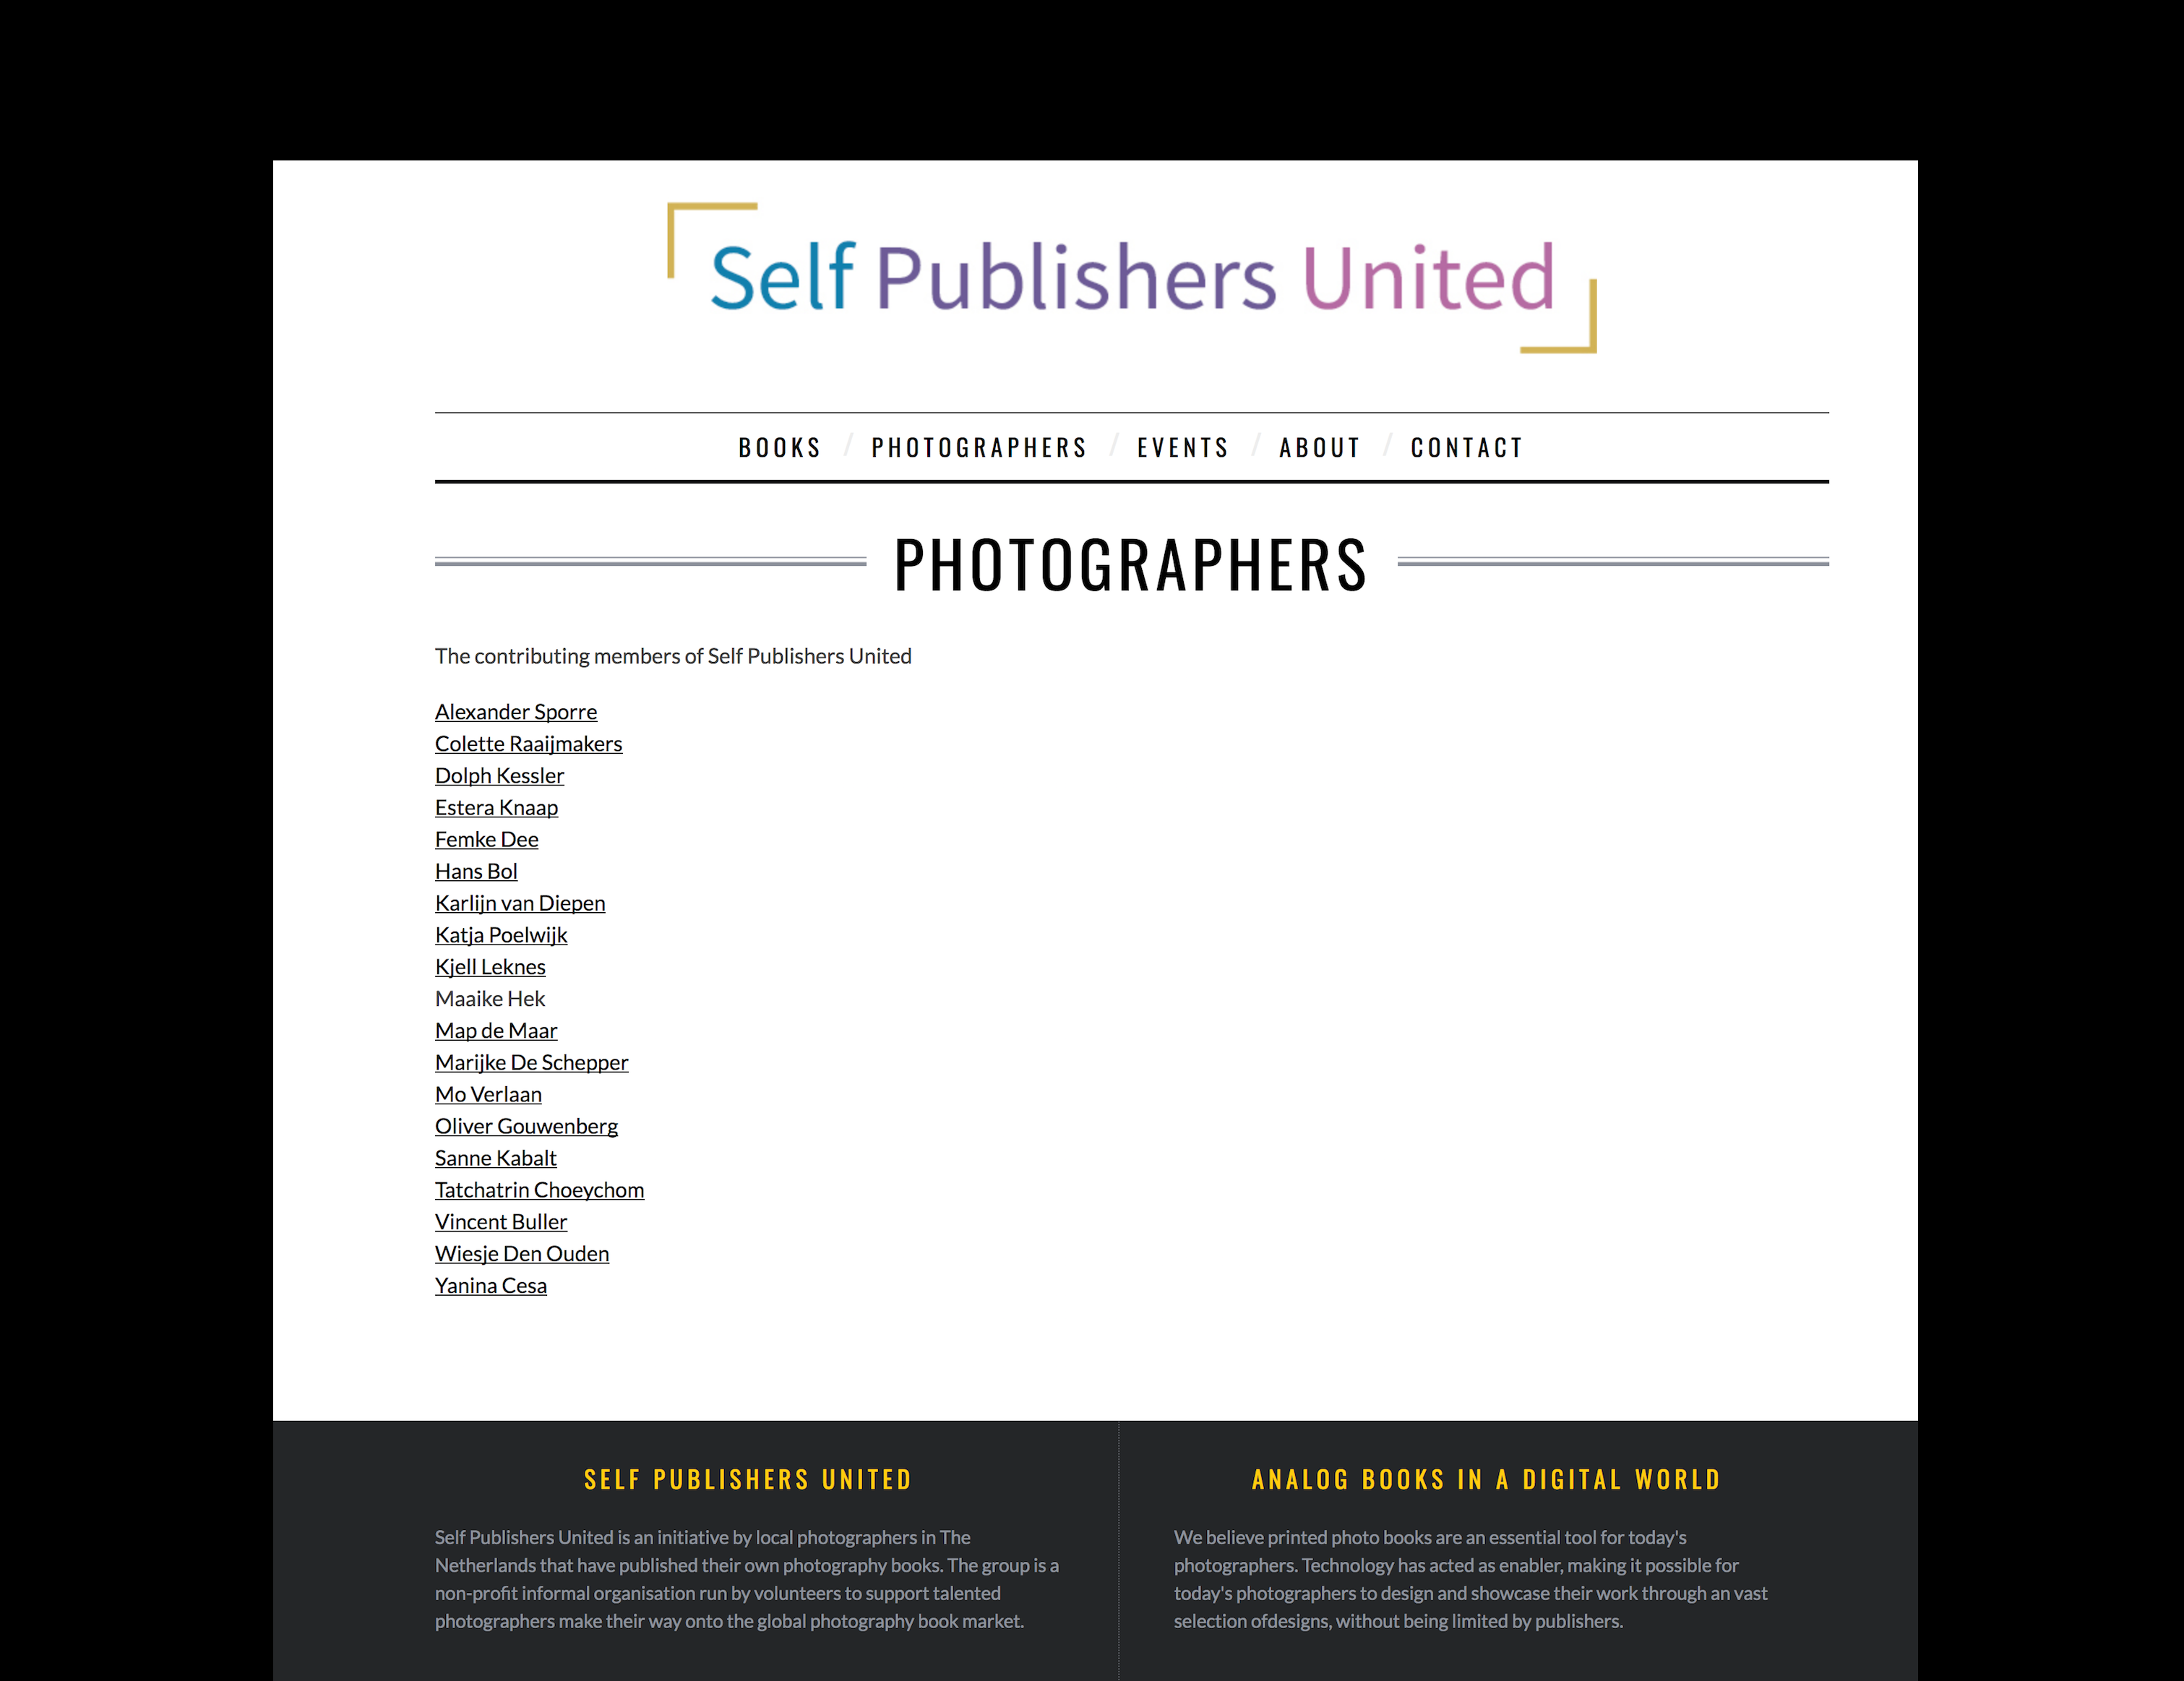 Photographers taking part in Self Publishers United